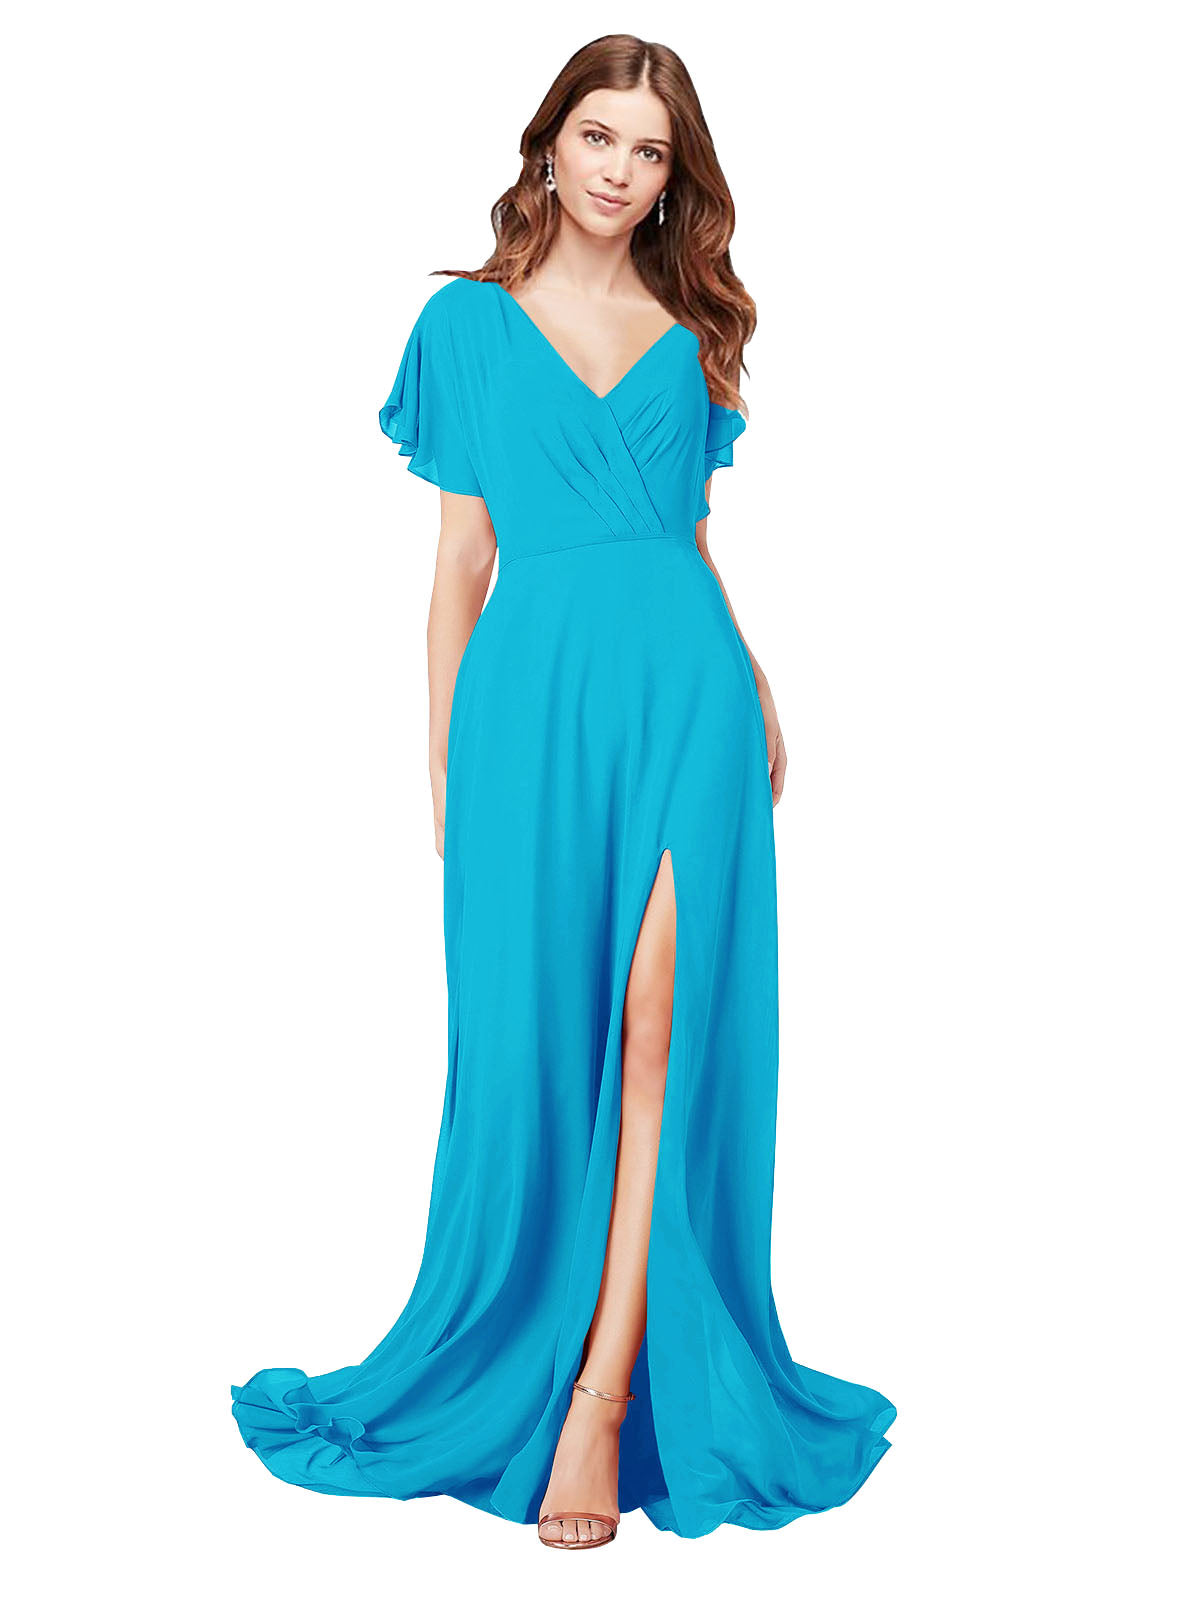 RightBrides Marisol Turquoise A-Line V-Neck Cap Sleeves Long Bridesmaid Dress